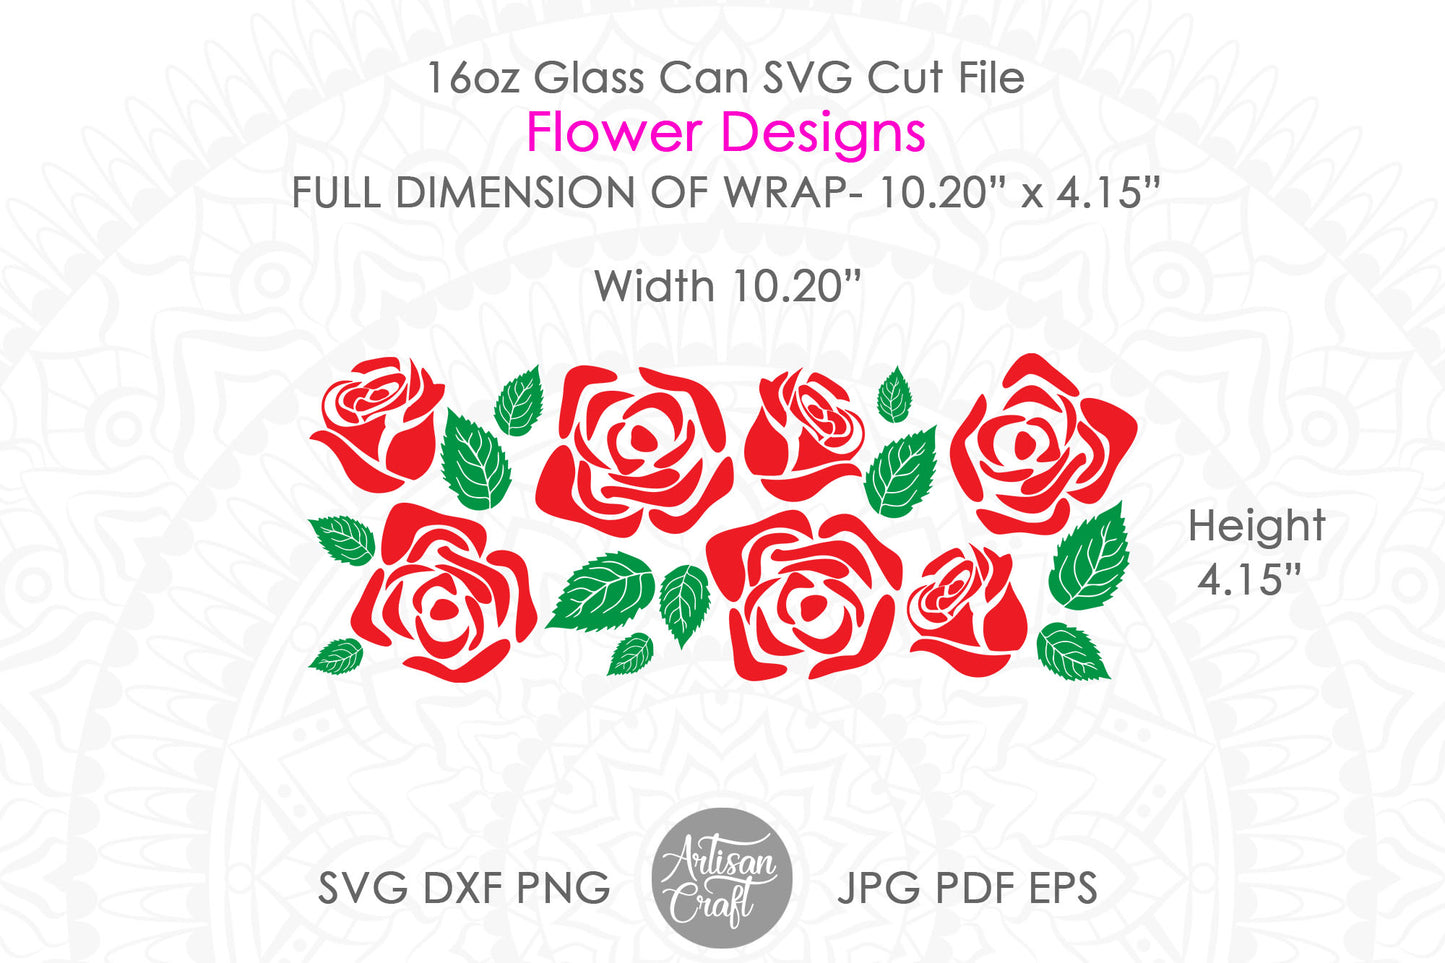 16oz Glass can SVG with flower design